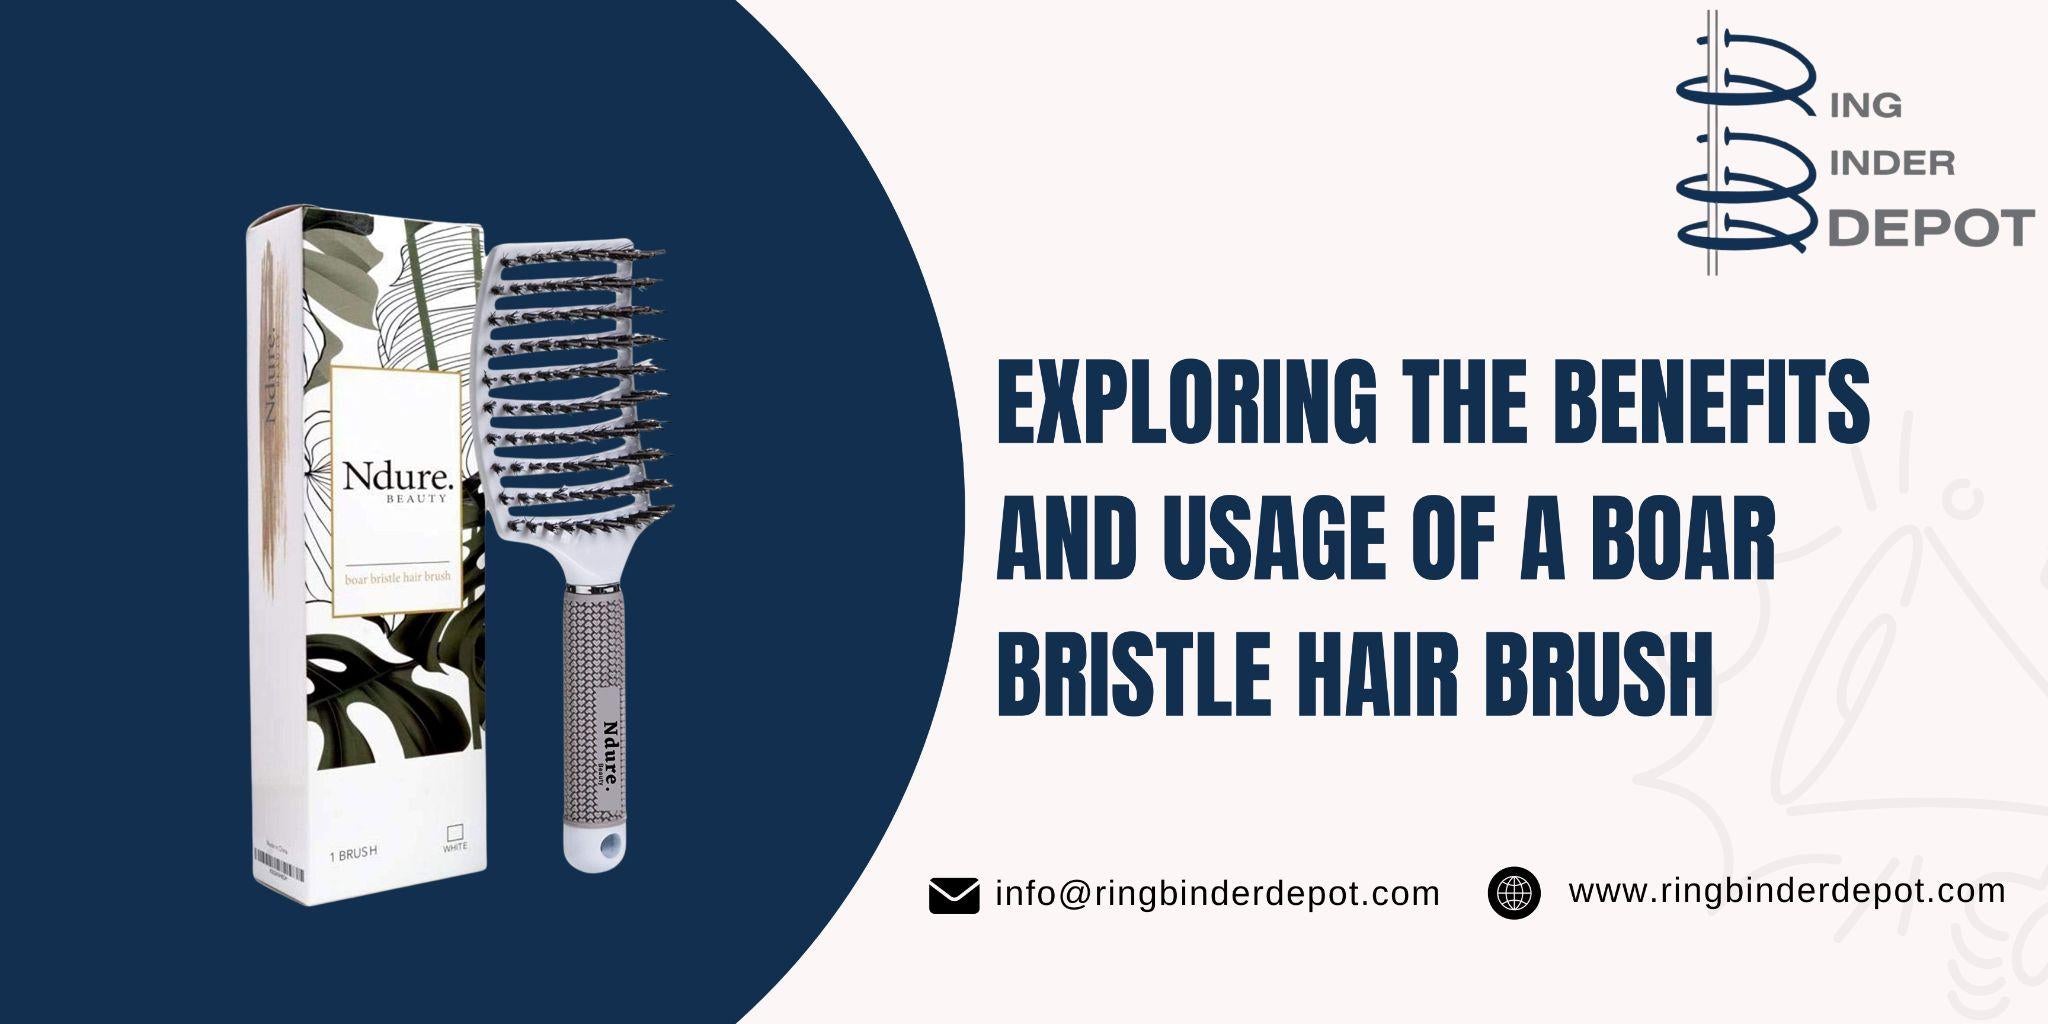 Exploring the Benefits and Usage of a Boar Bristle Hair Brush